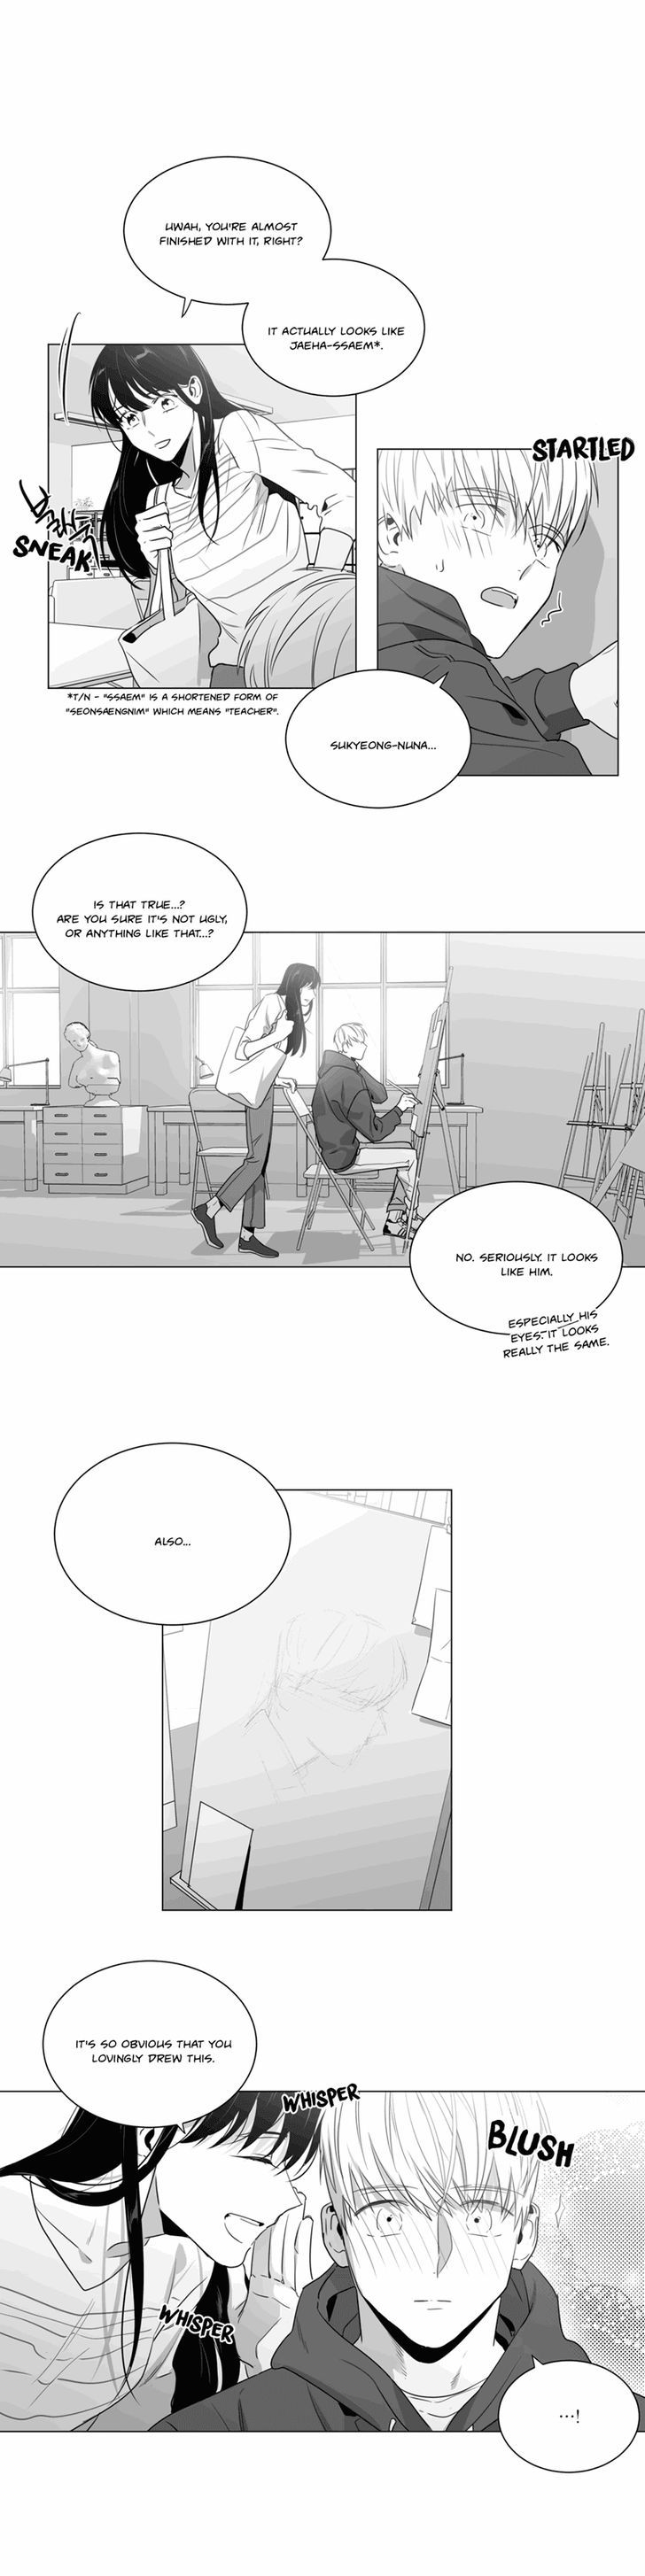 Lover Boy (Lezhin) Chapter 035 page 6